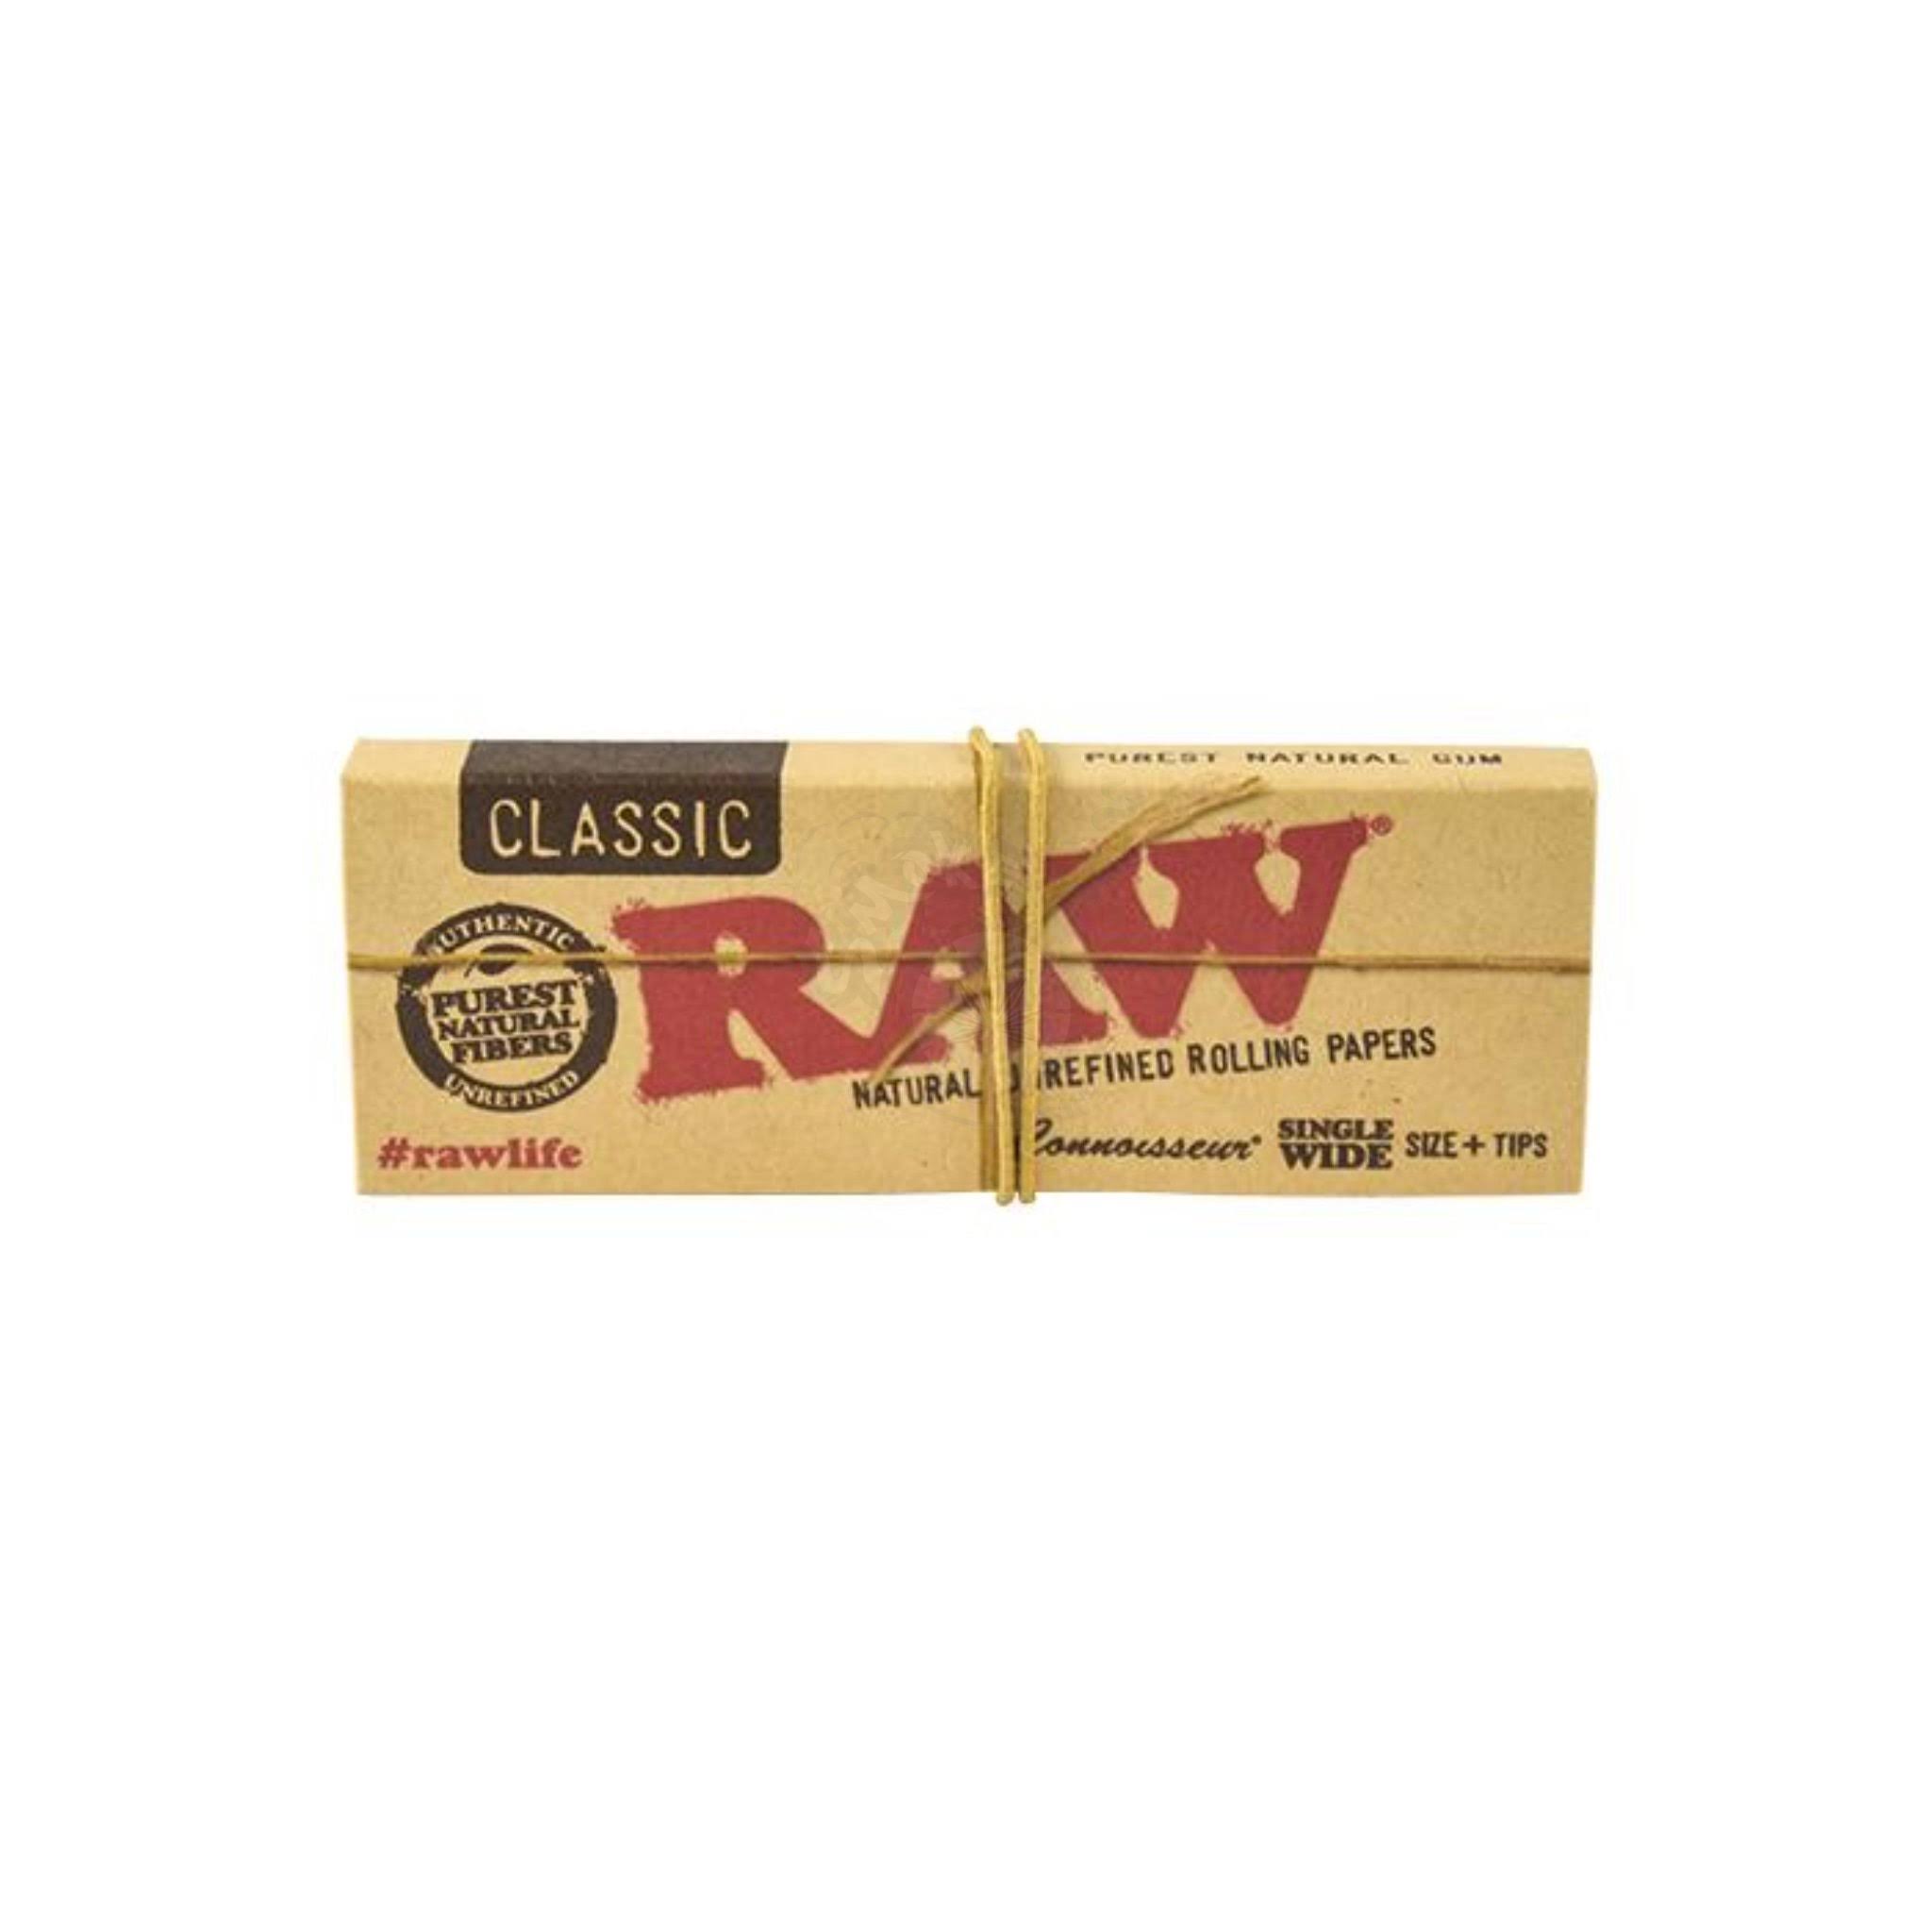 RAW Classic Connoisseur with Tips - Single Wide